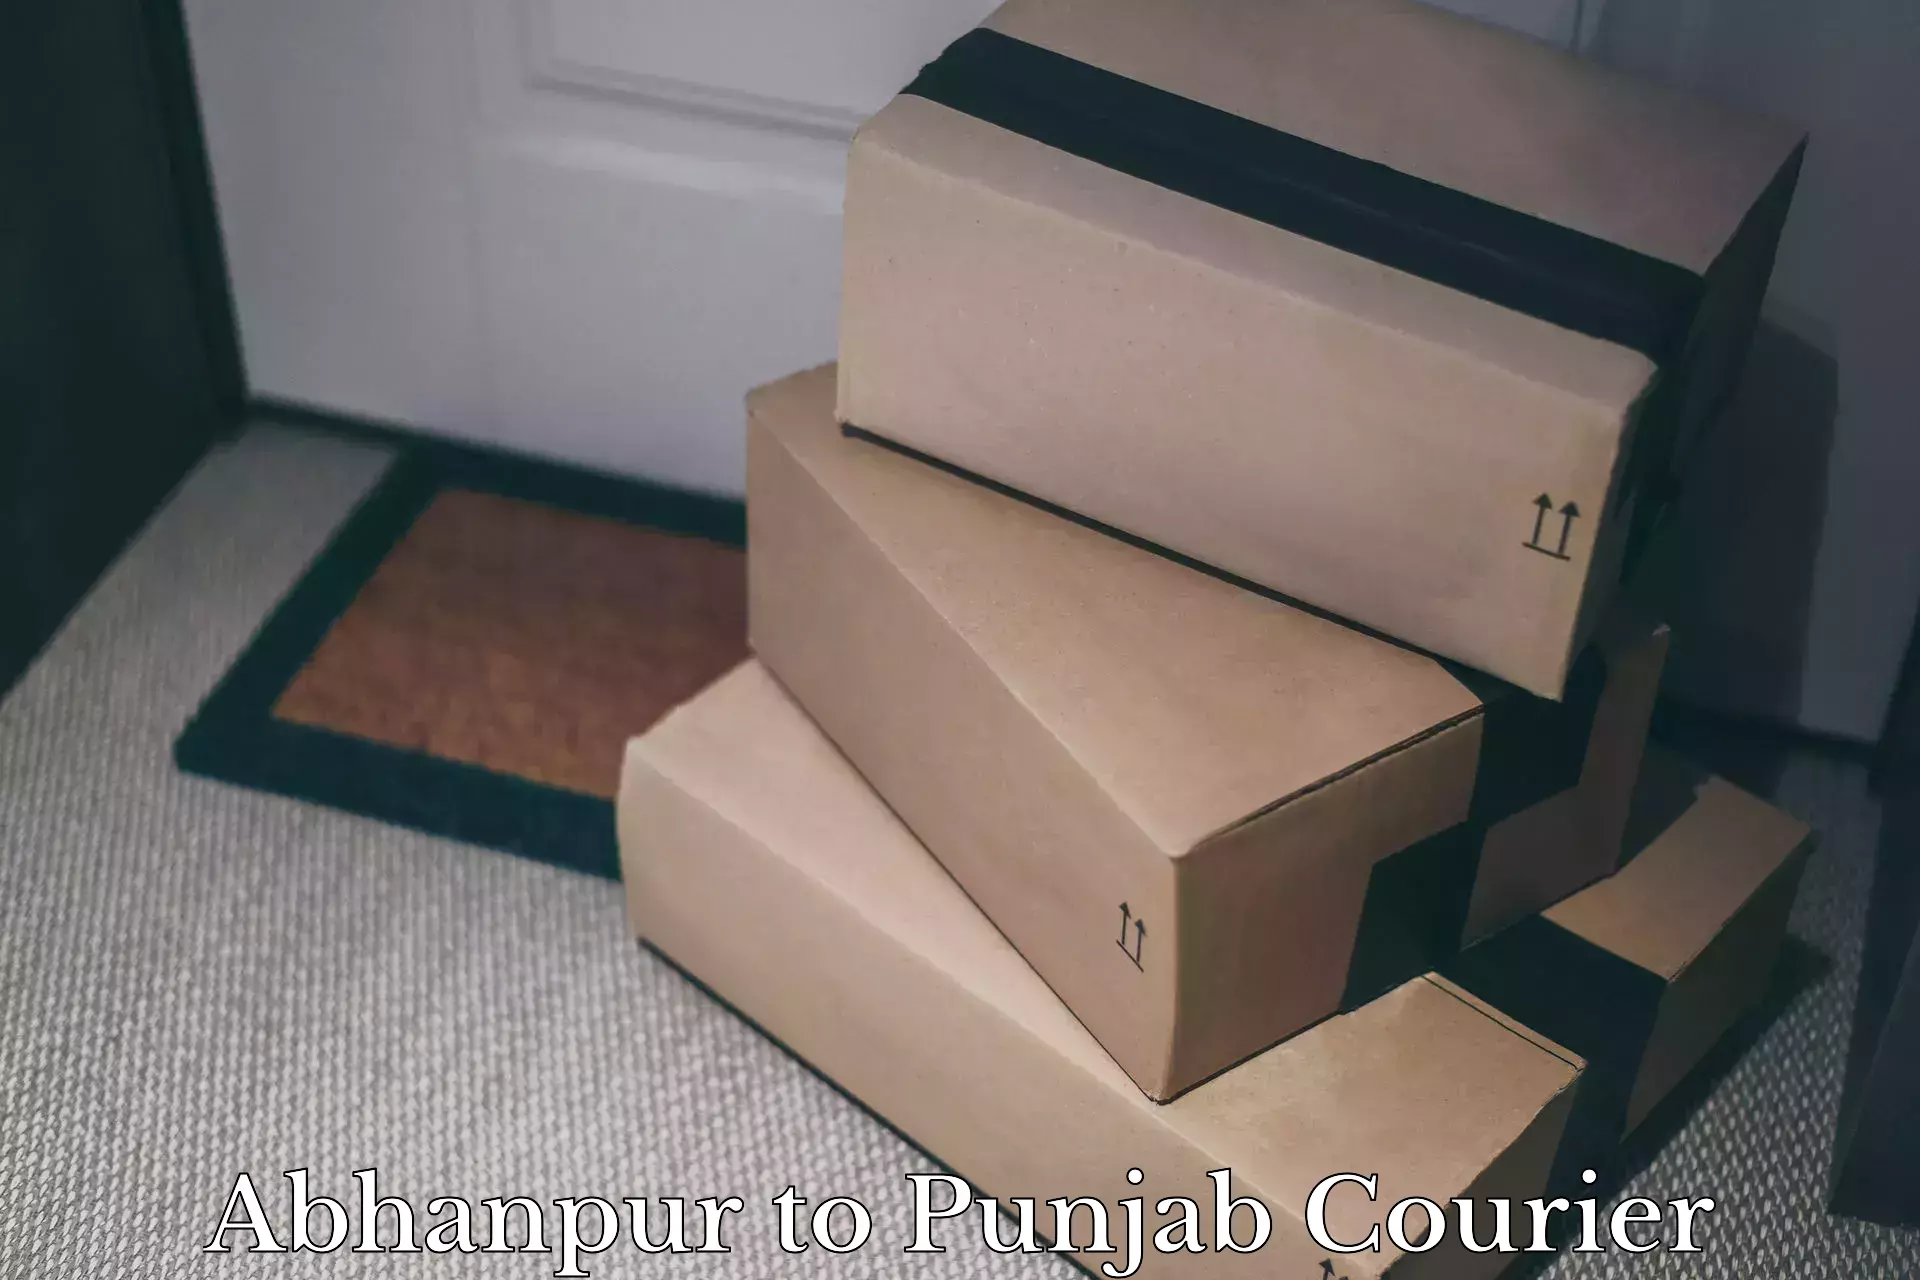 Professional home movers Abhanpur to Punjab